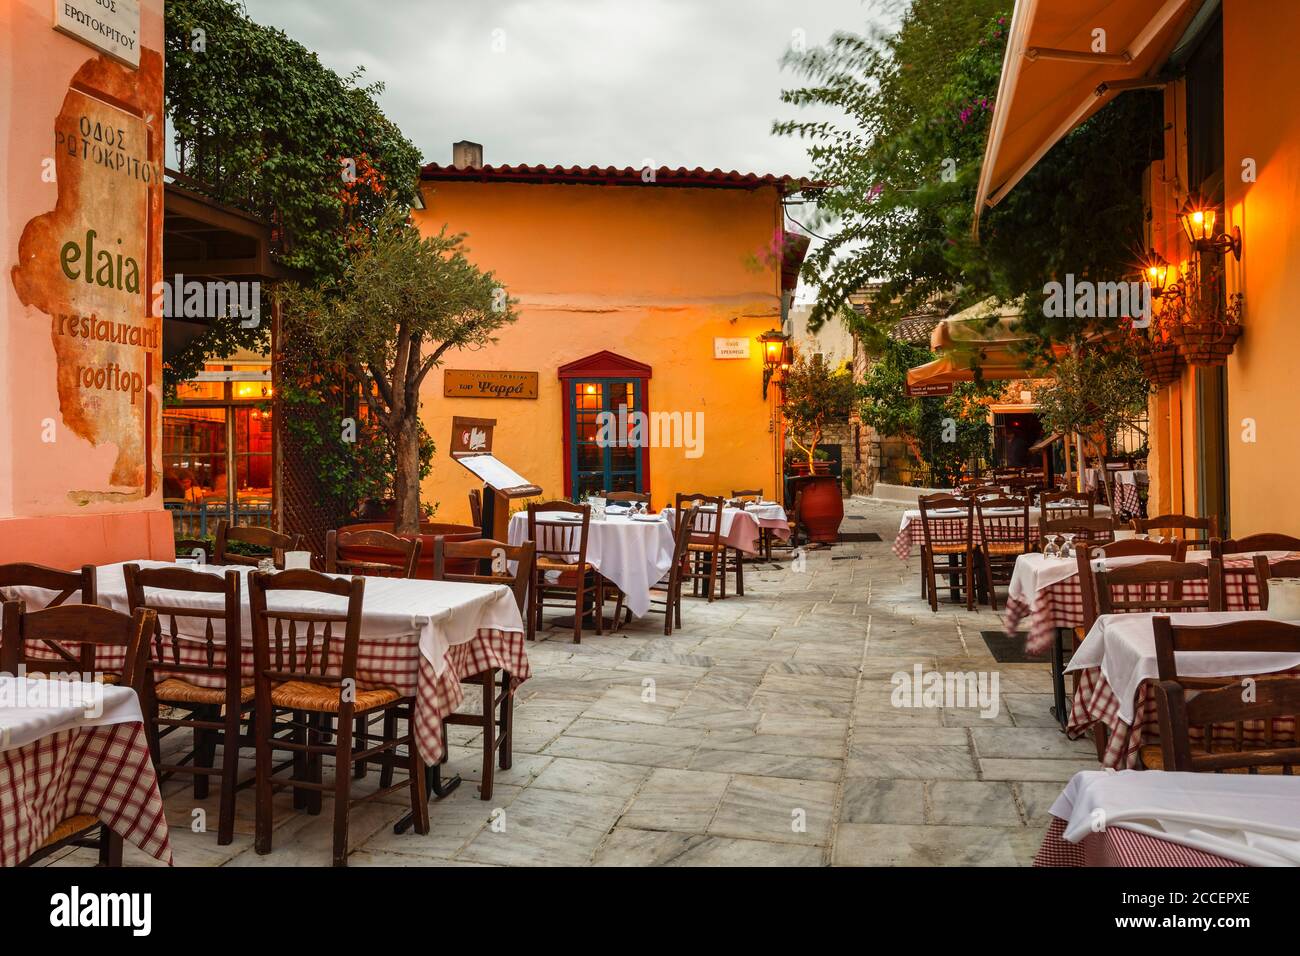 Athens, Greece - September 25, 2018: Taverna in a street of Plaka district in Athens, Greece. Stock Photo